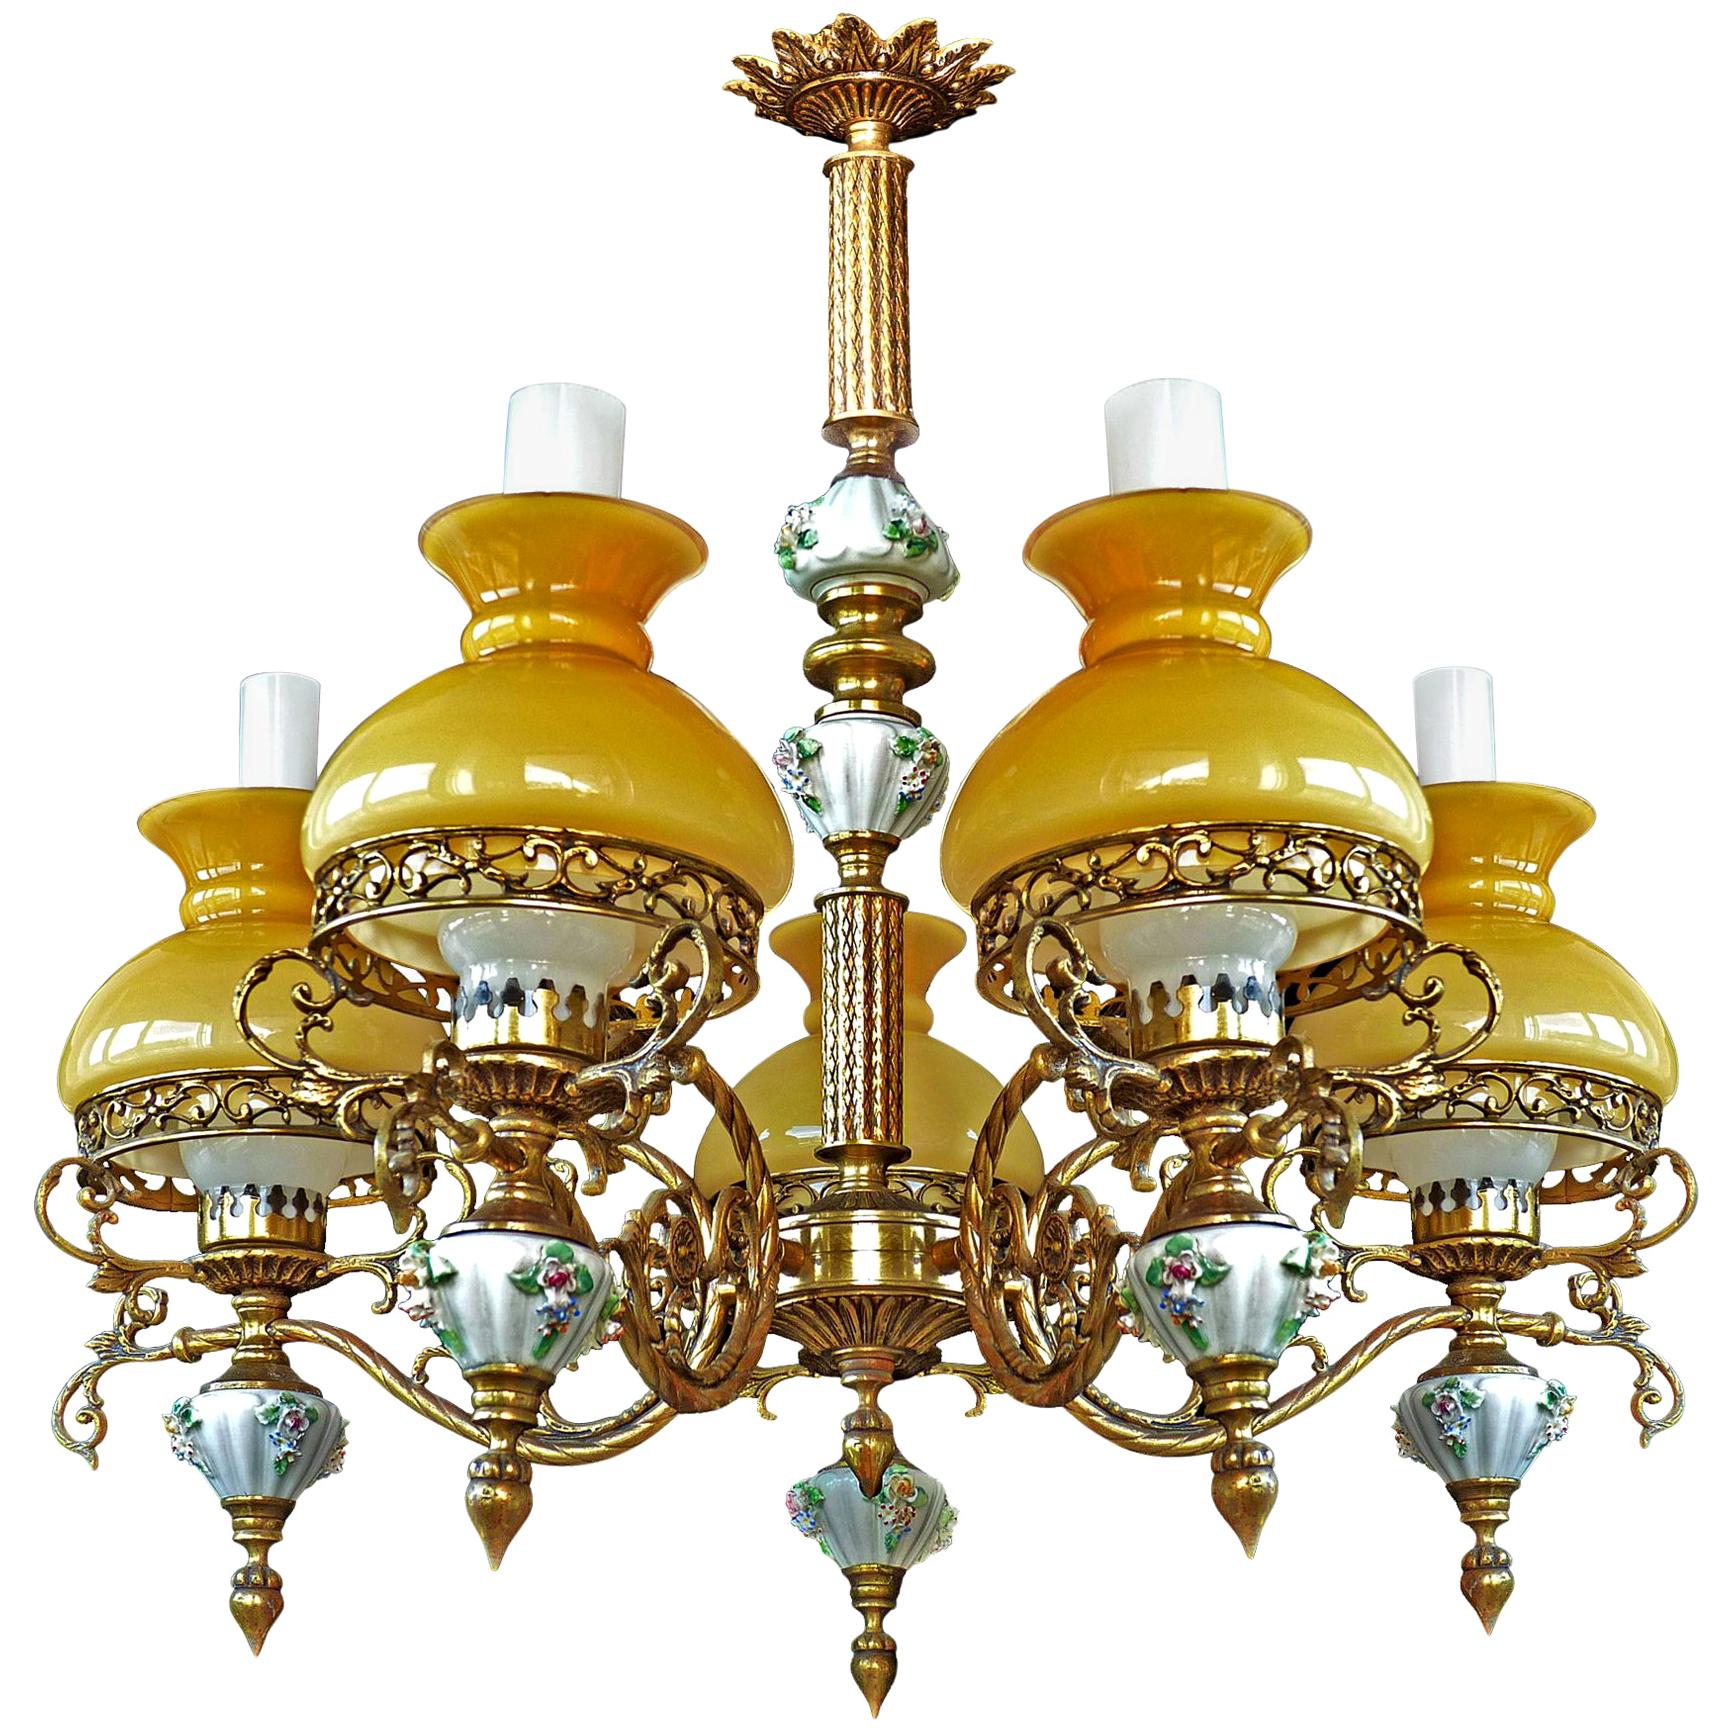 French Victorian Chandelier Porcelain Limoges Style, Gilded Bronze & Amber Glass